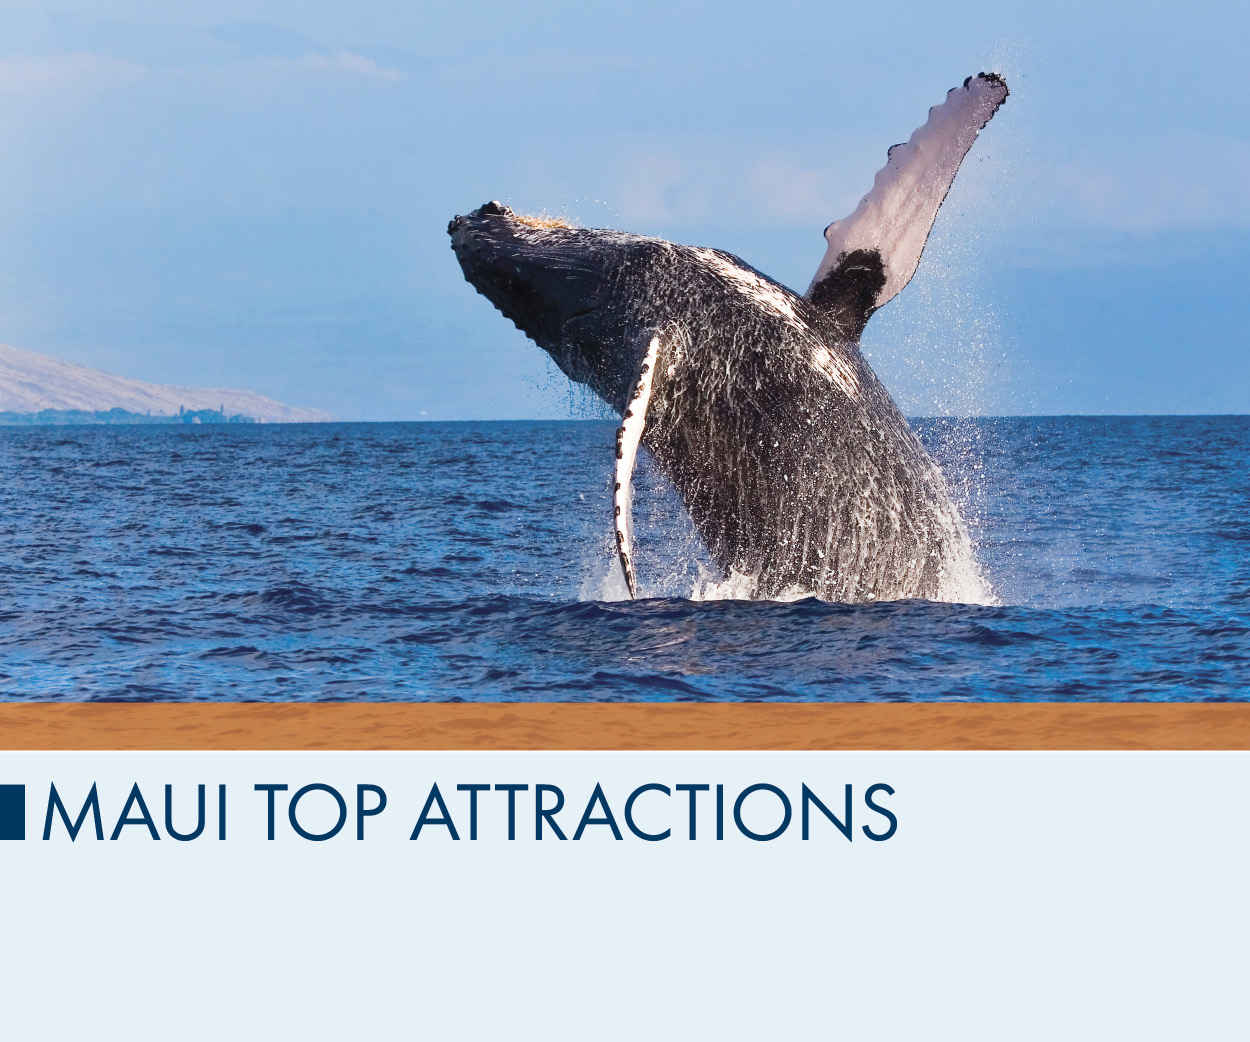 Maui Top Attractions